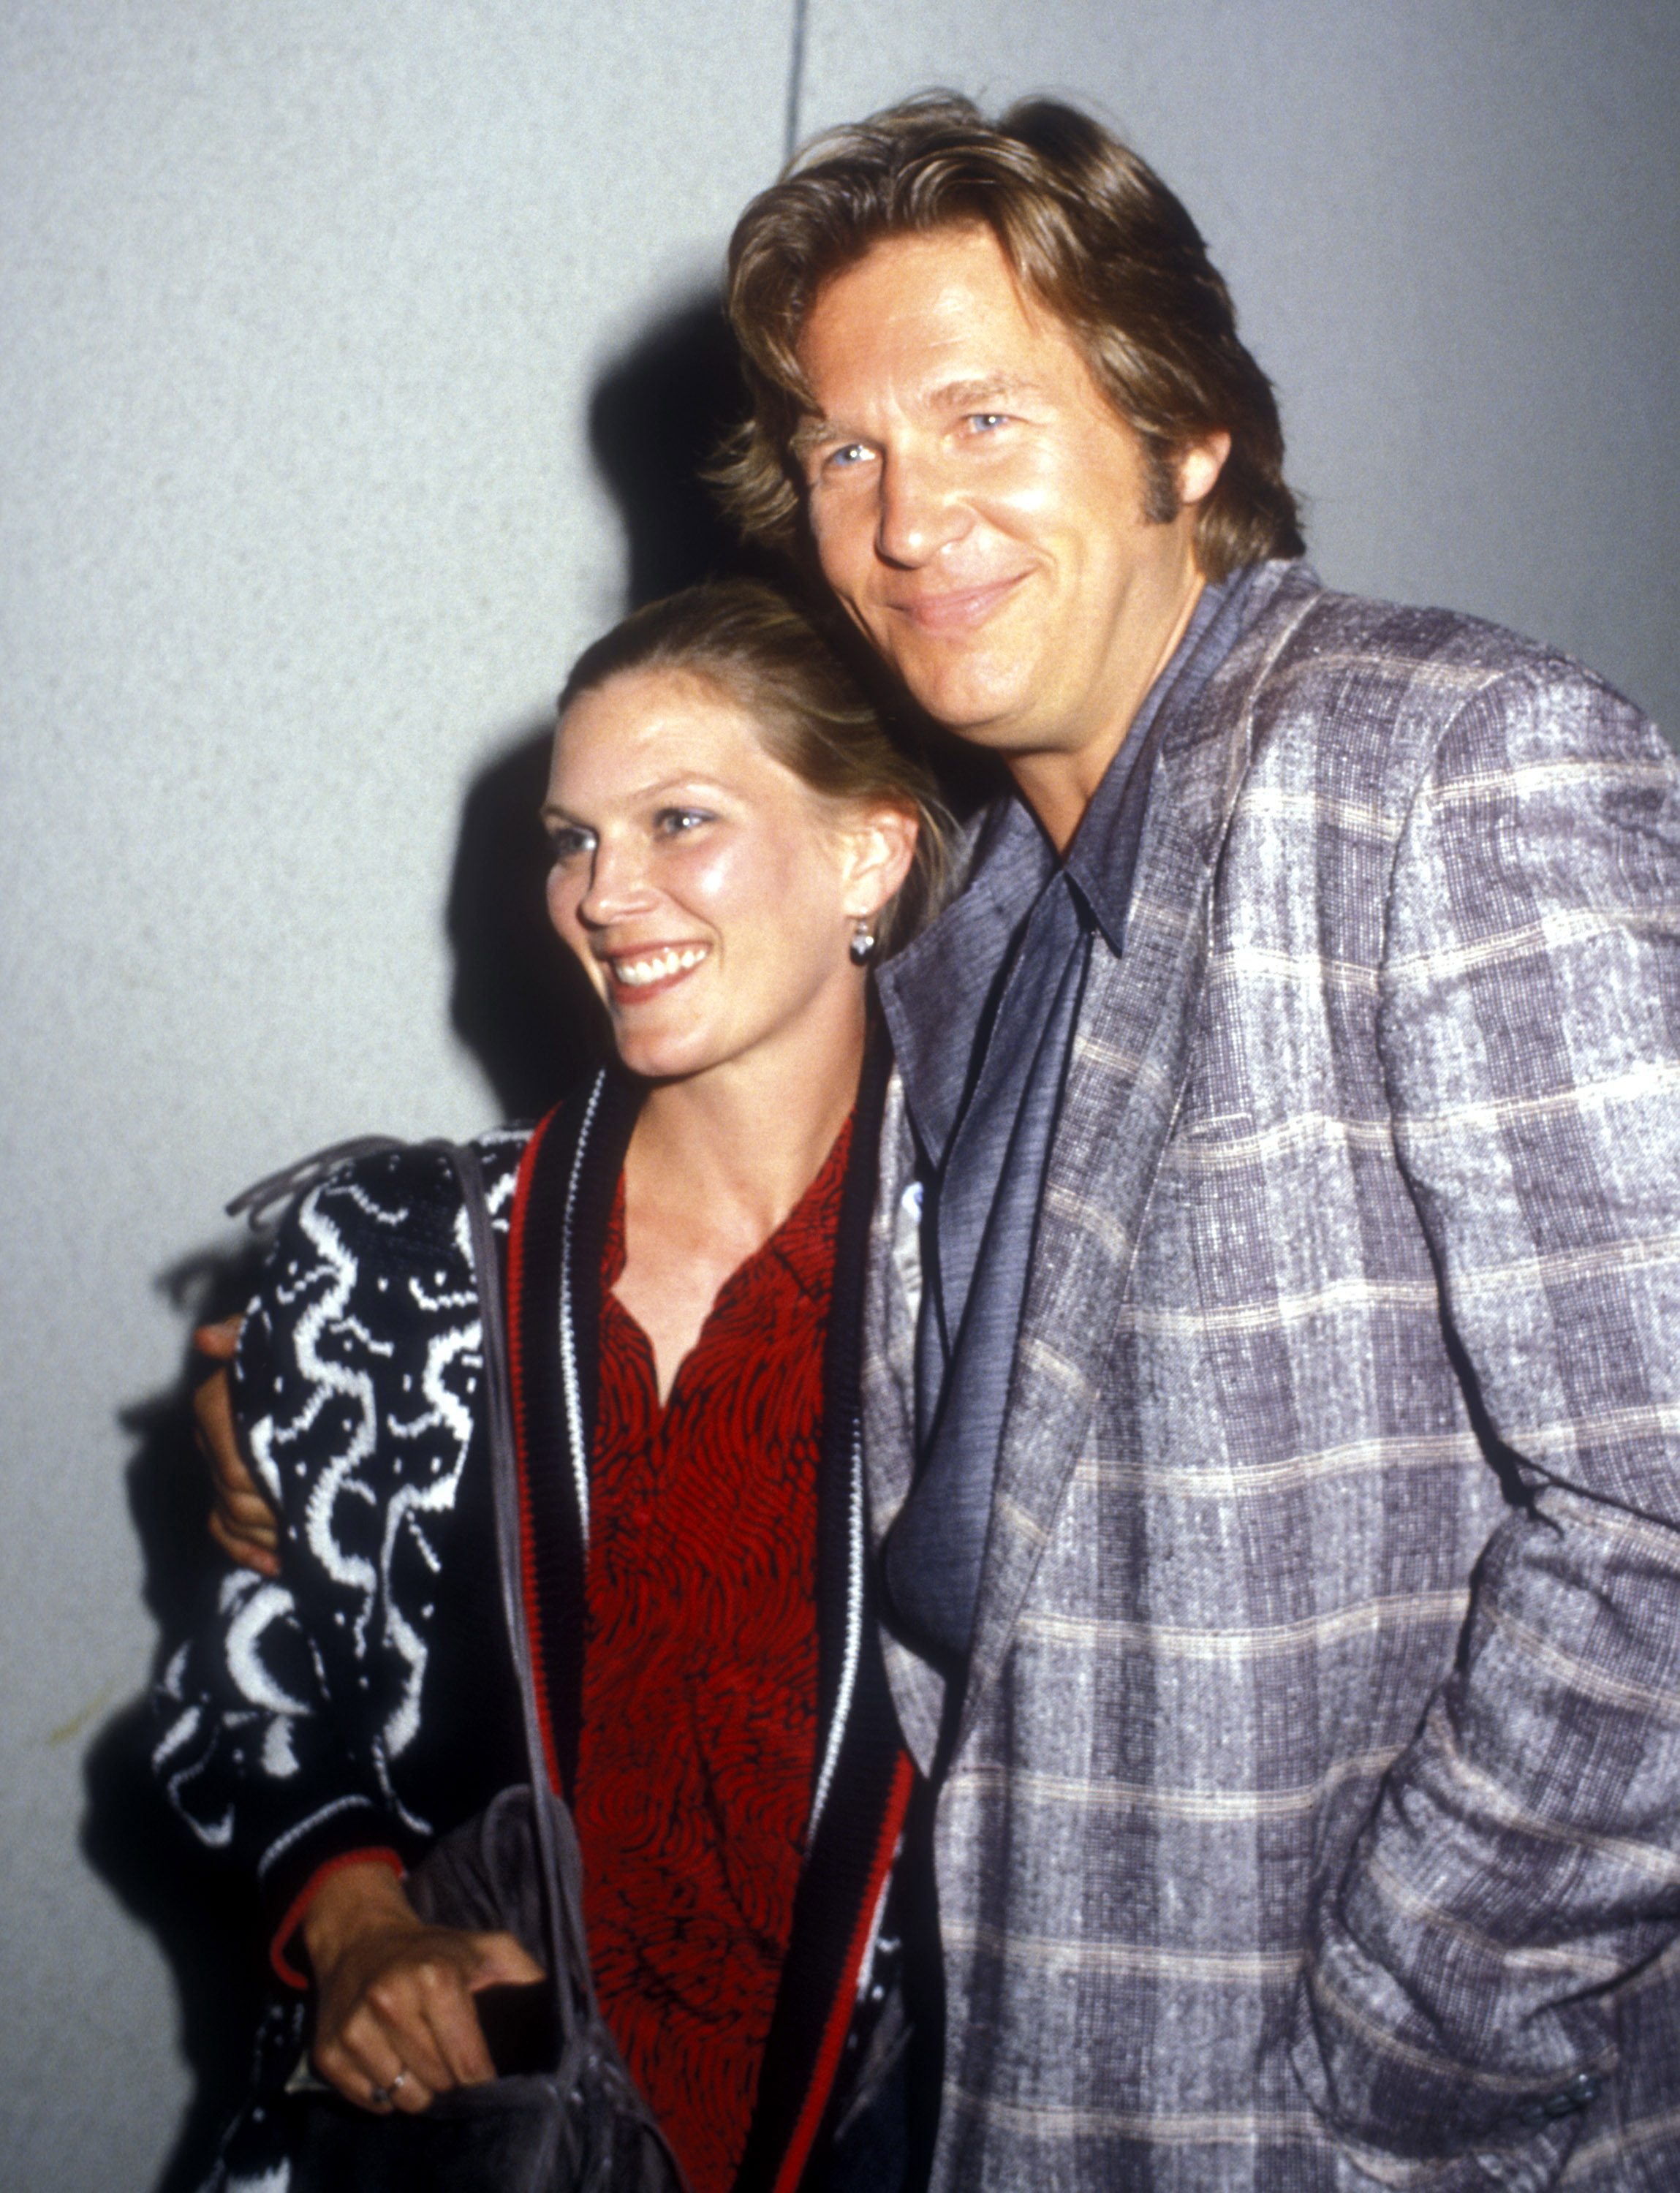 Susan and Jeff Bridges at the Eurythmics Concert at the Roxy on June 16, 1986. | Source: Getty Images